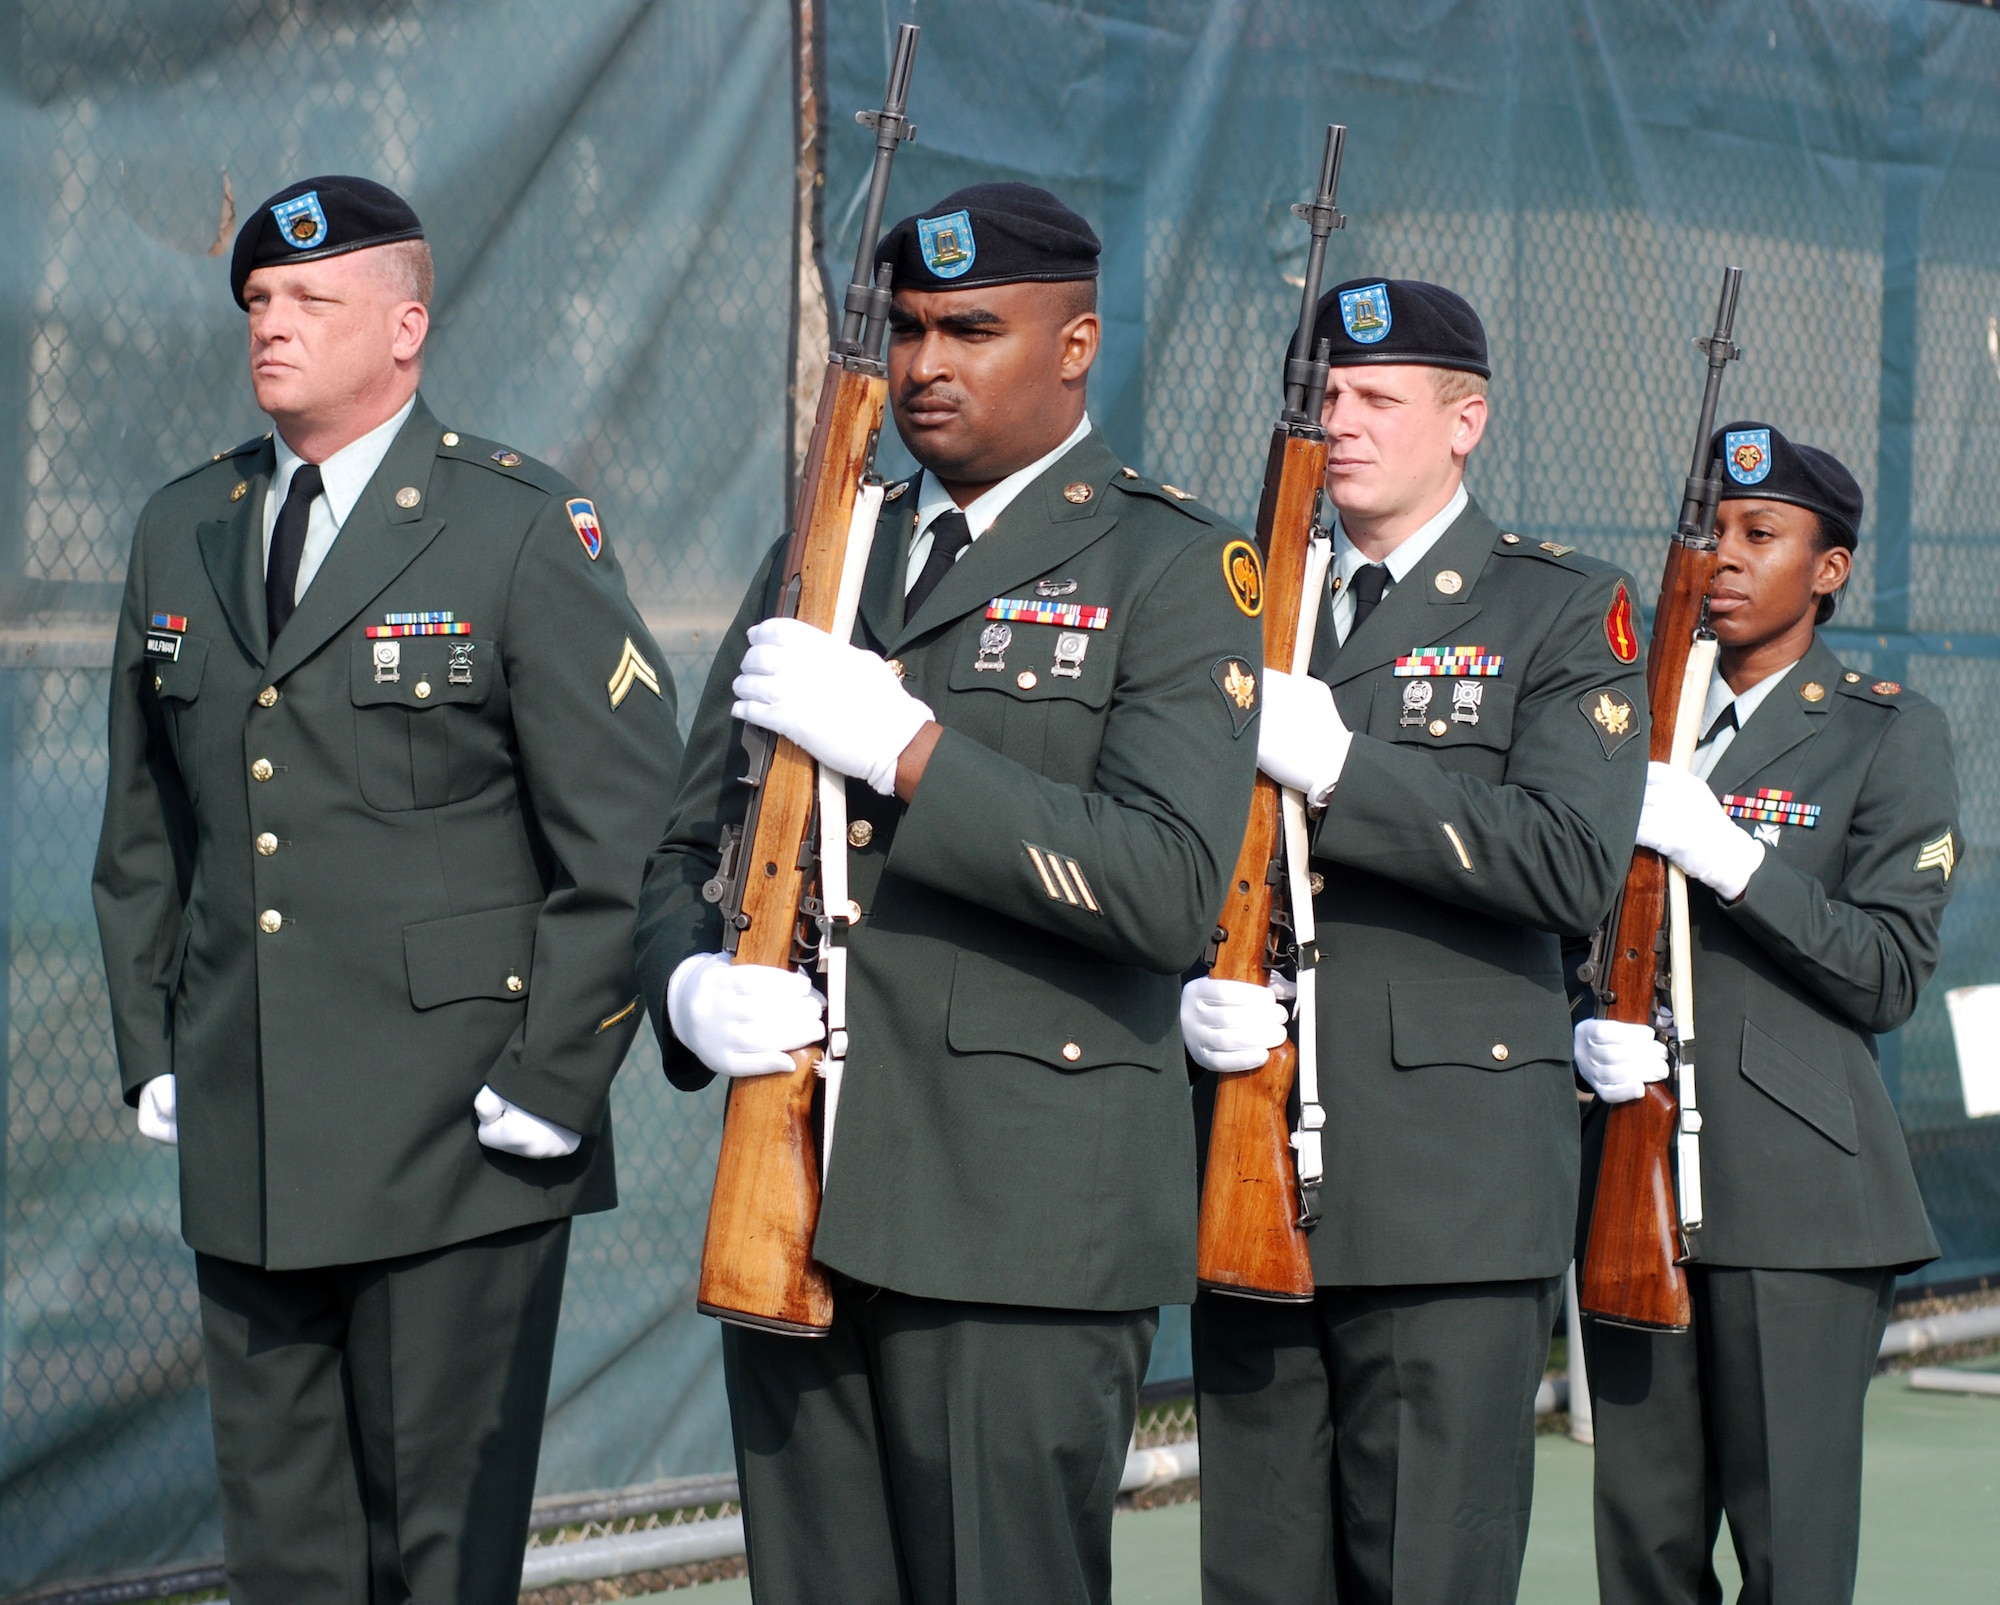 Members of an Army Reserve Honor Guard practice with the Blue Eagles Total Force Honor Guard at March Air Reserve Base, Calif., Feb. 12. The Honor Guard rehearsed a full funeral detail, including flag folding, pallbearing and a firing squad.  (U.S. Air Force photo/Staff Sgt. Megan Crusher)